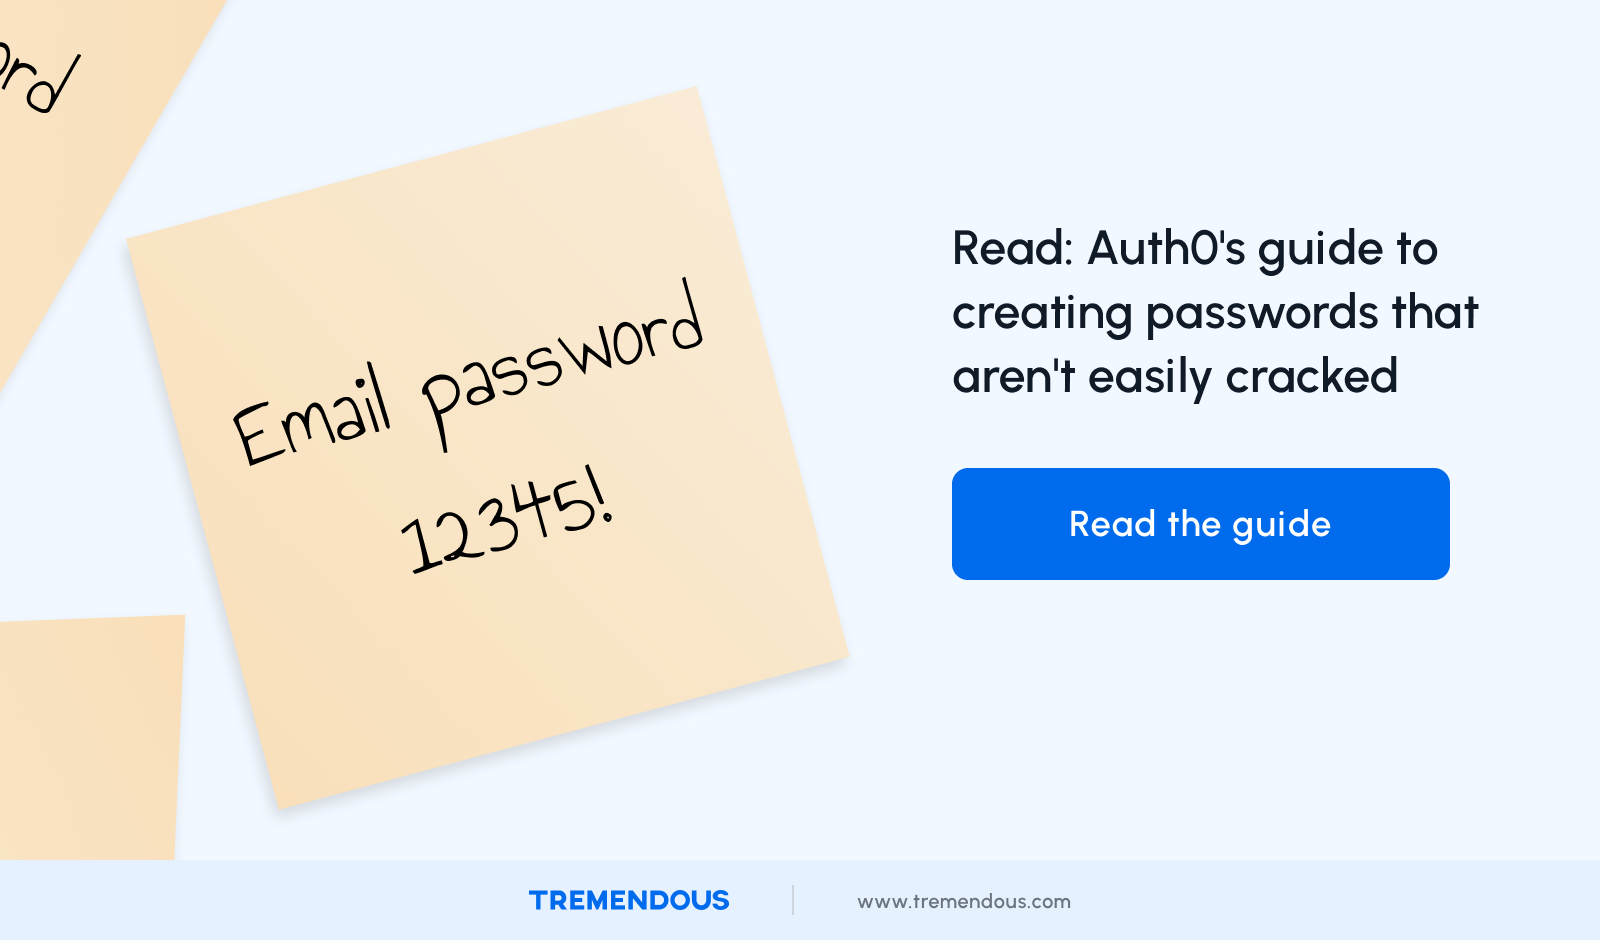 Read: Auth0's guide to creating passwords that aren't easily cracked